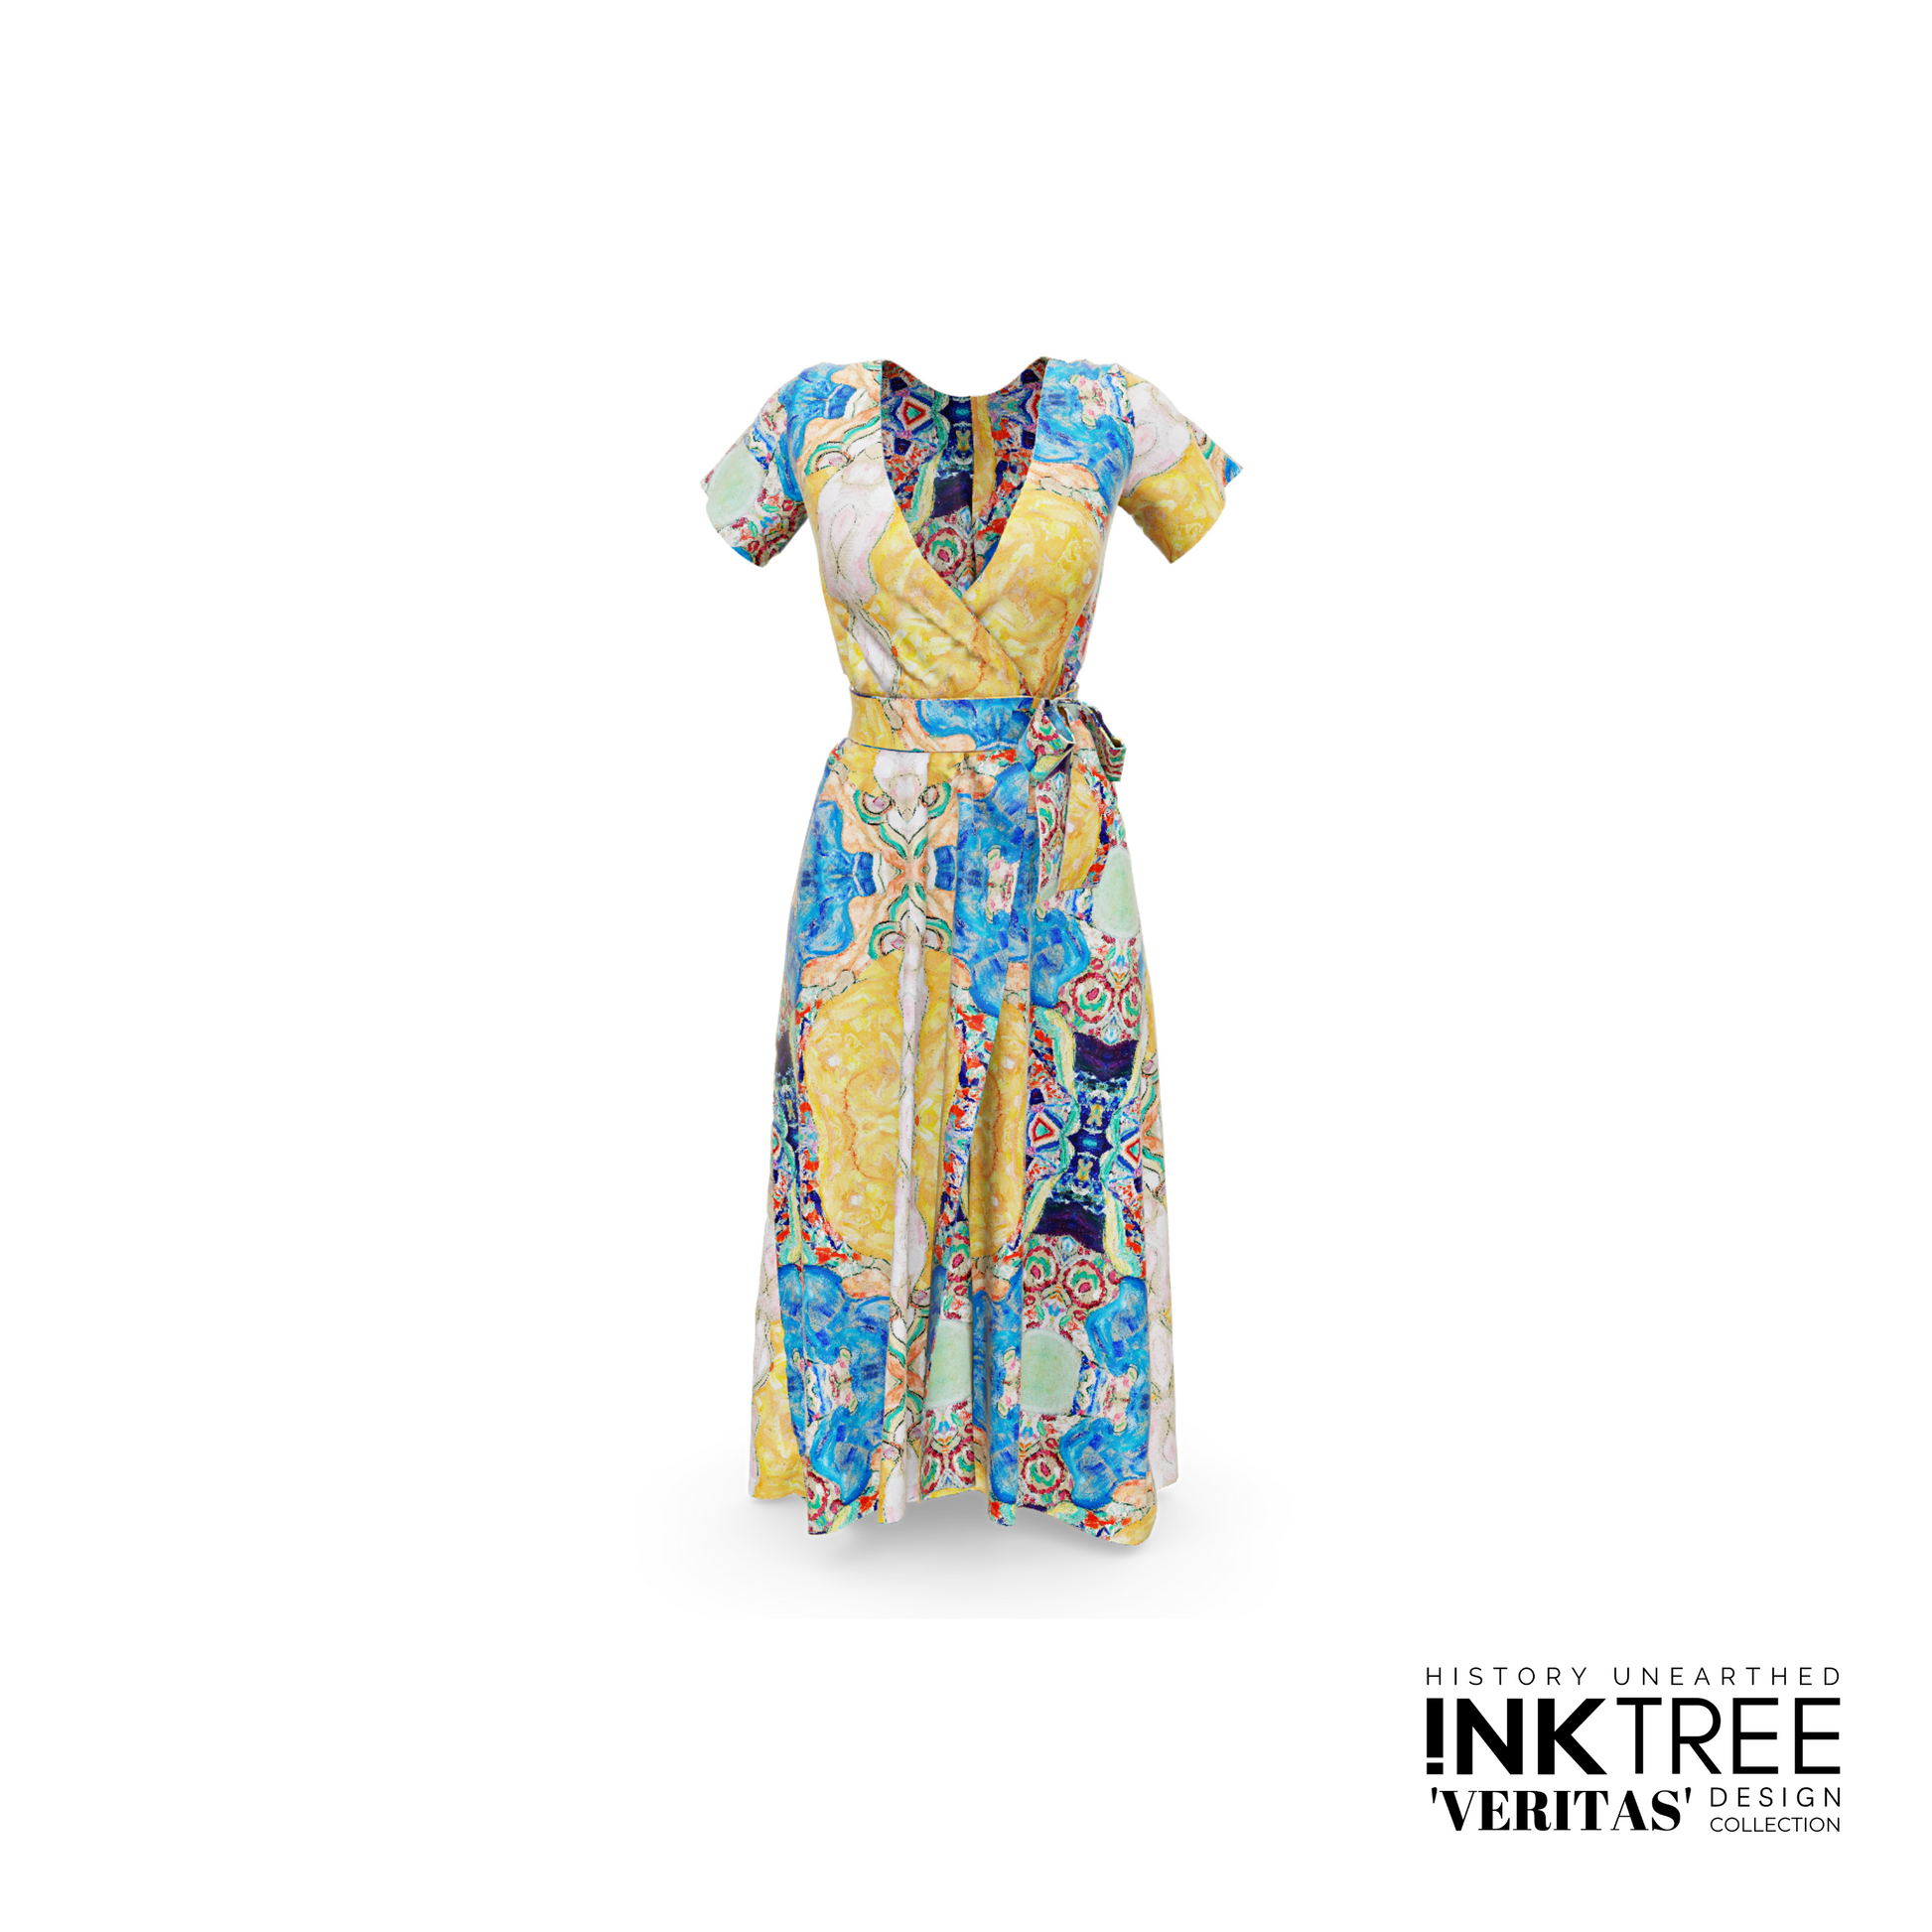 A dress with a green, blue and yellow pattern.